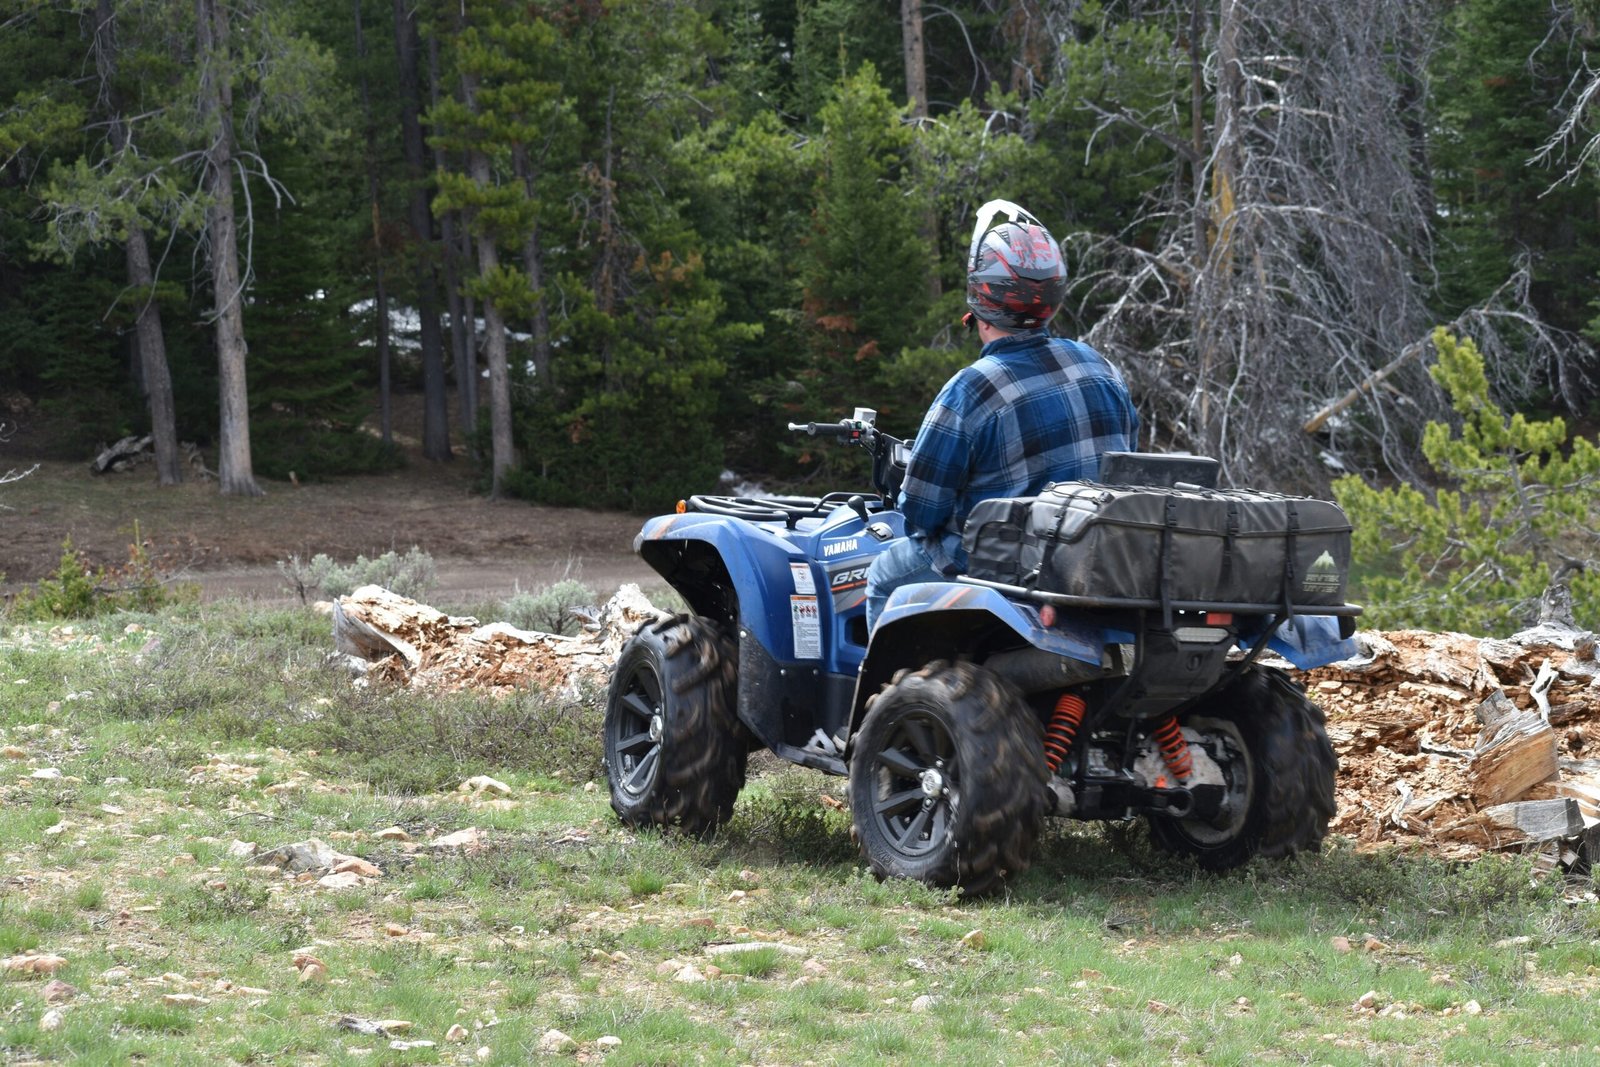 Proven Tips and Techniques for Maneuvering Rough Terrain on ATV